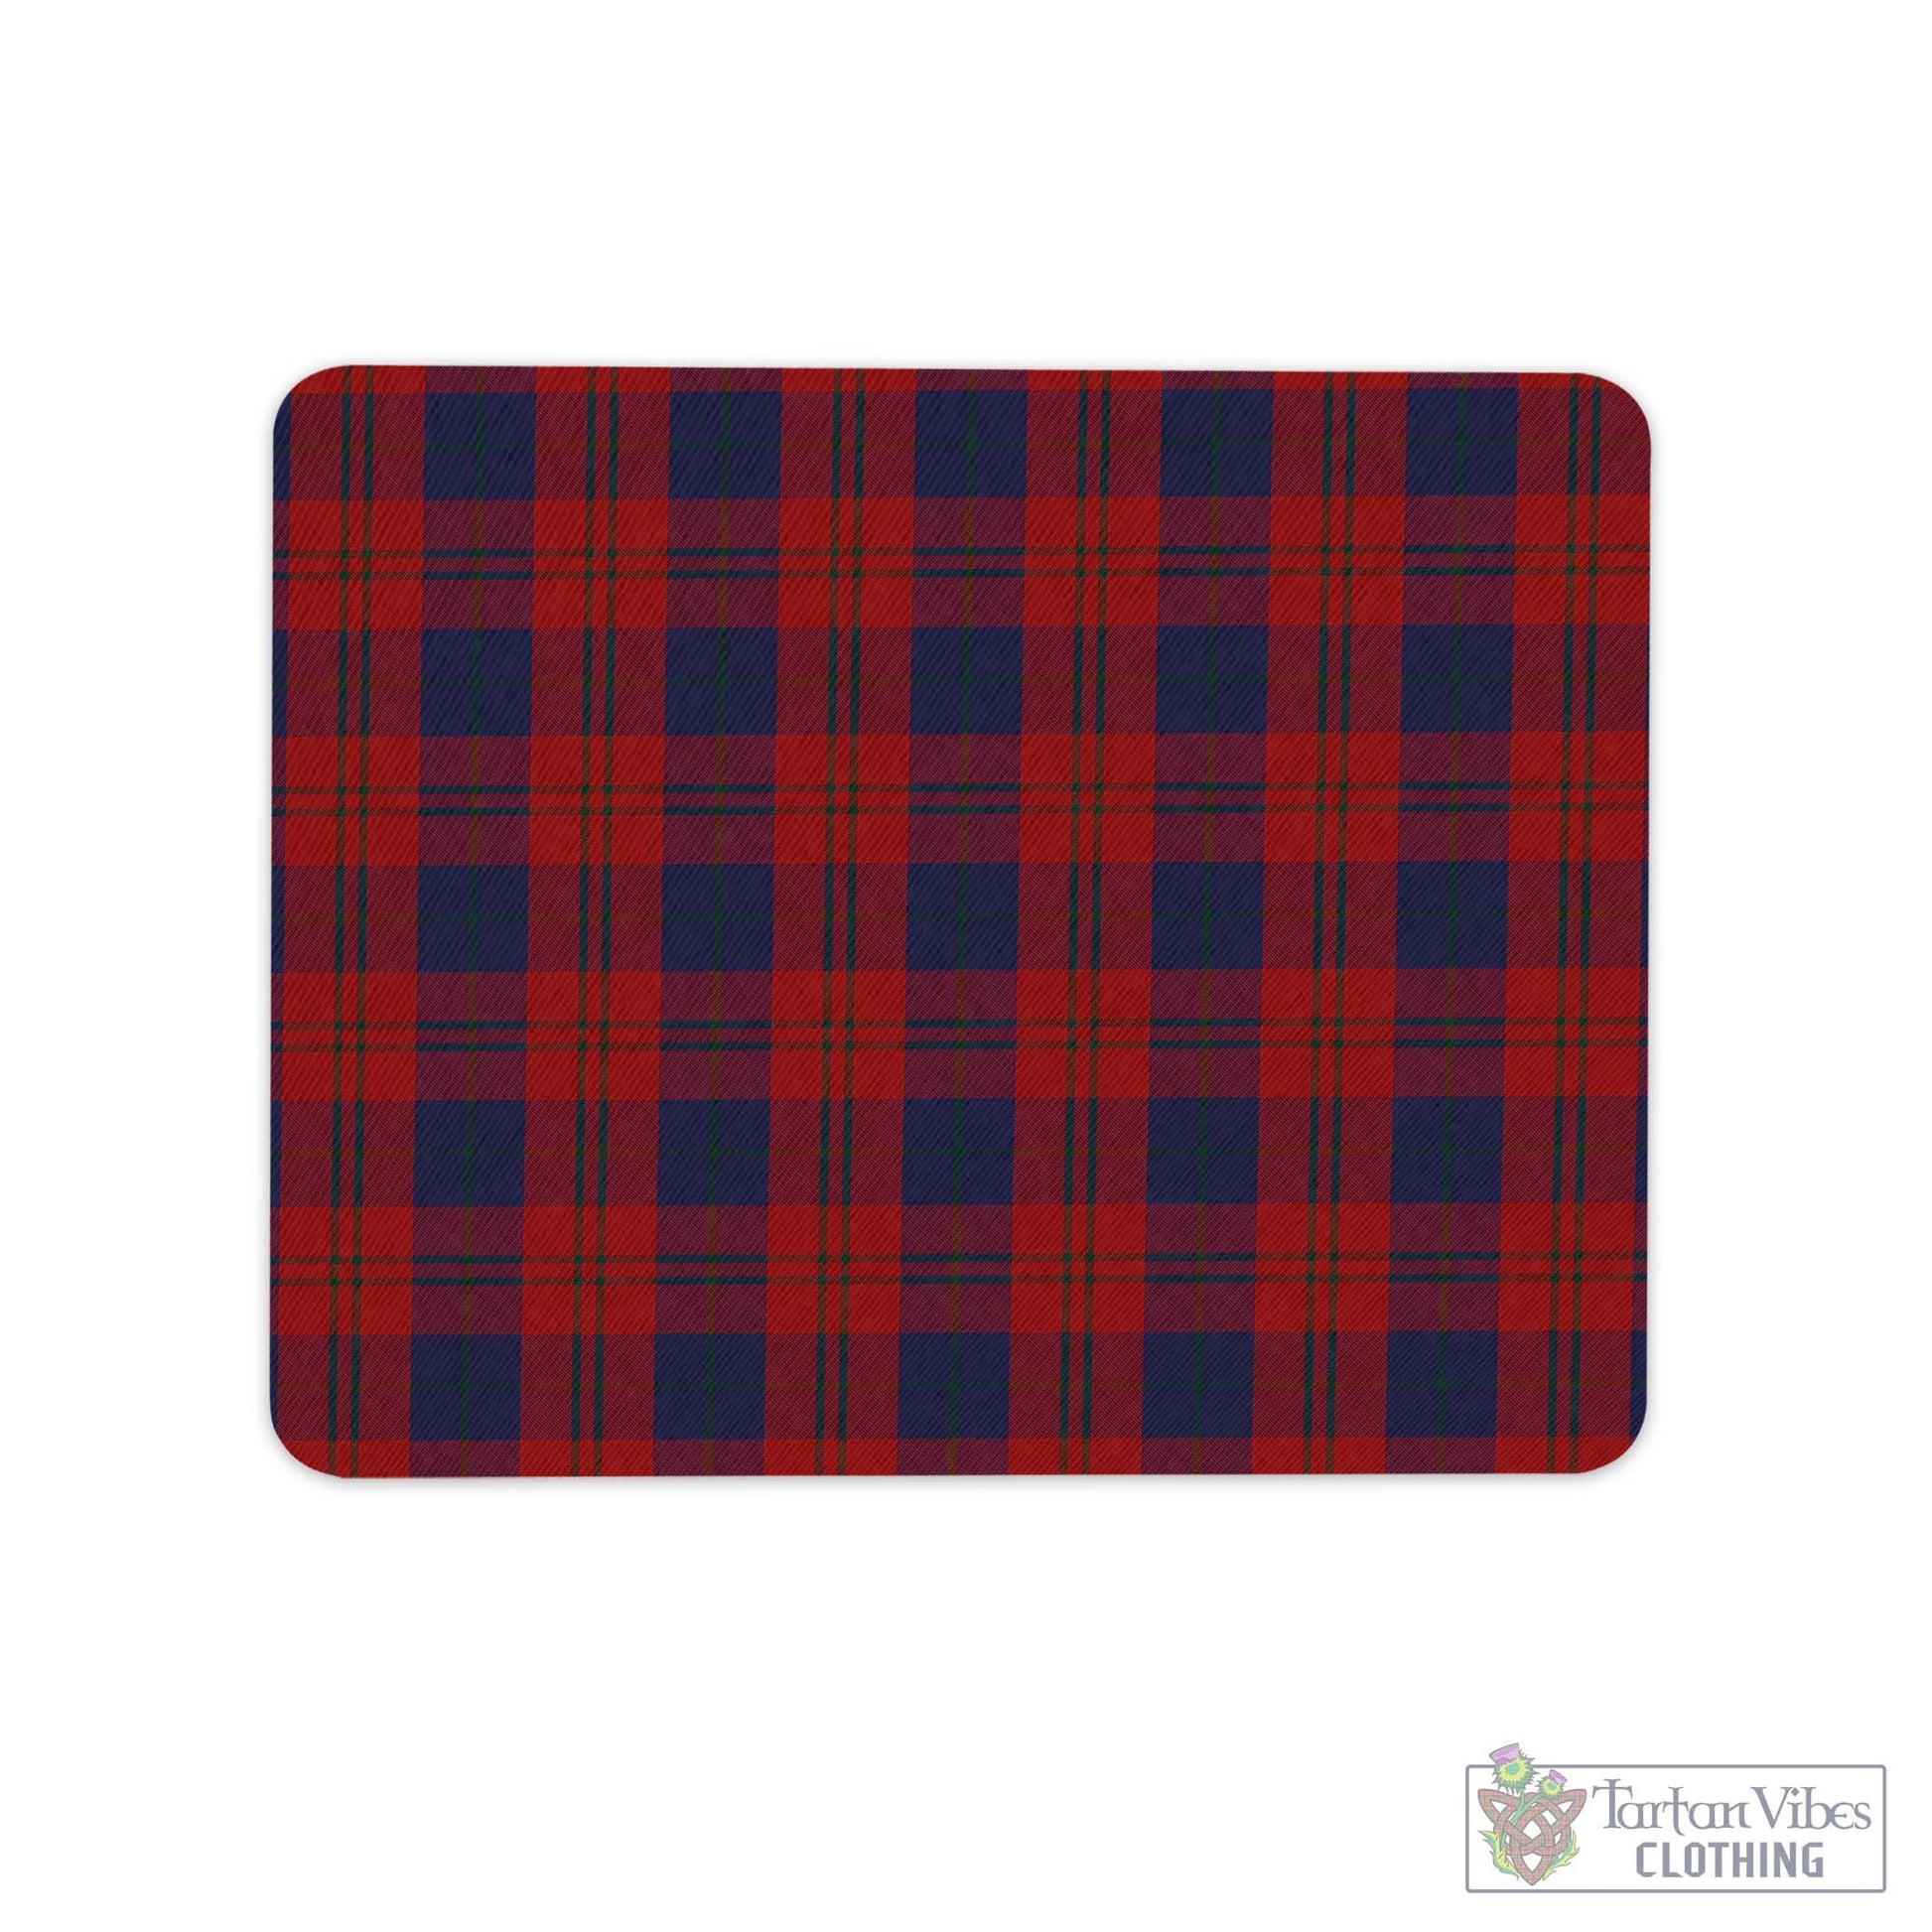 Tartan Vibes Clothing Wotherspoon Tartan Mouse Pad